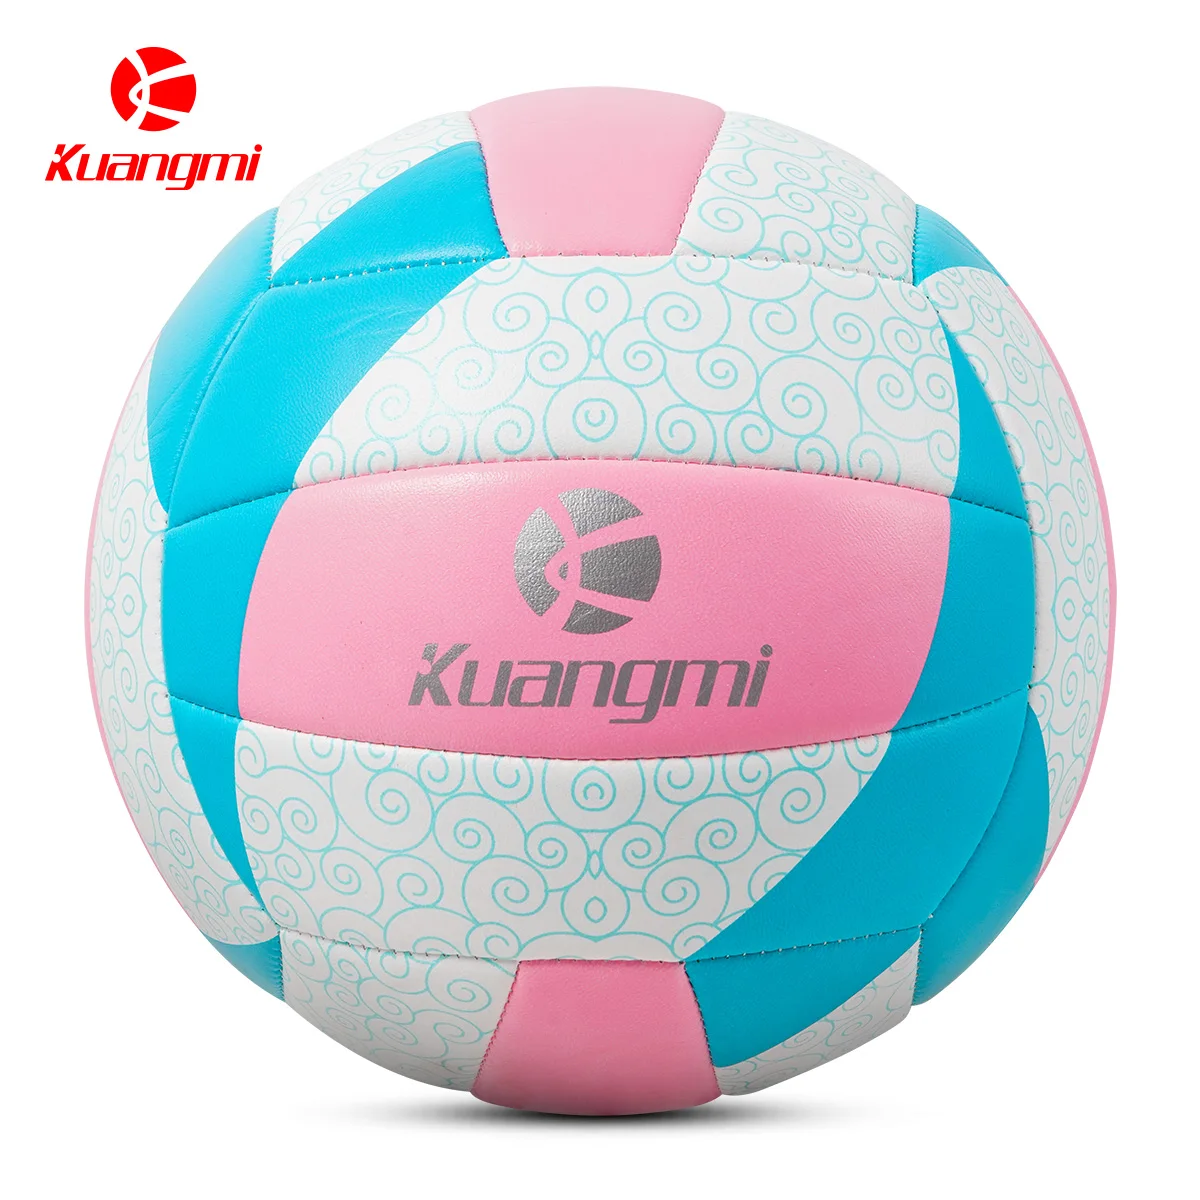 kuangmi-size-5-new-style-volleyball-machine-stitched-pvc-soft-leather-competition-training-balls-equipment-adults